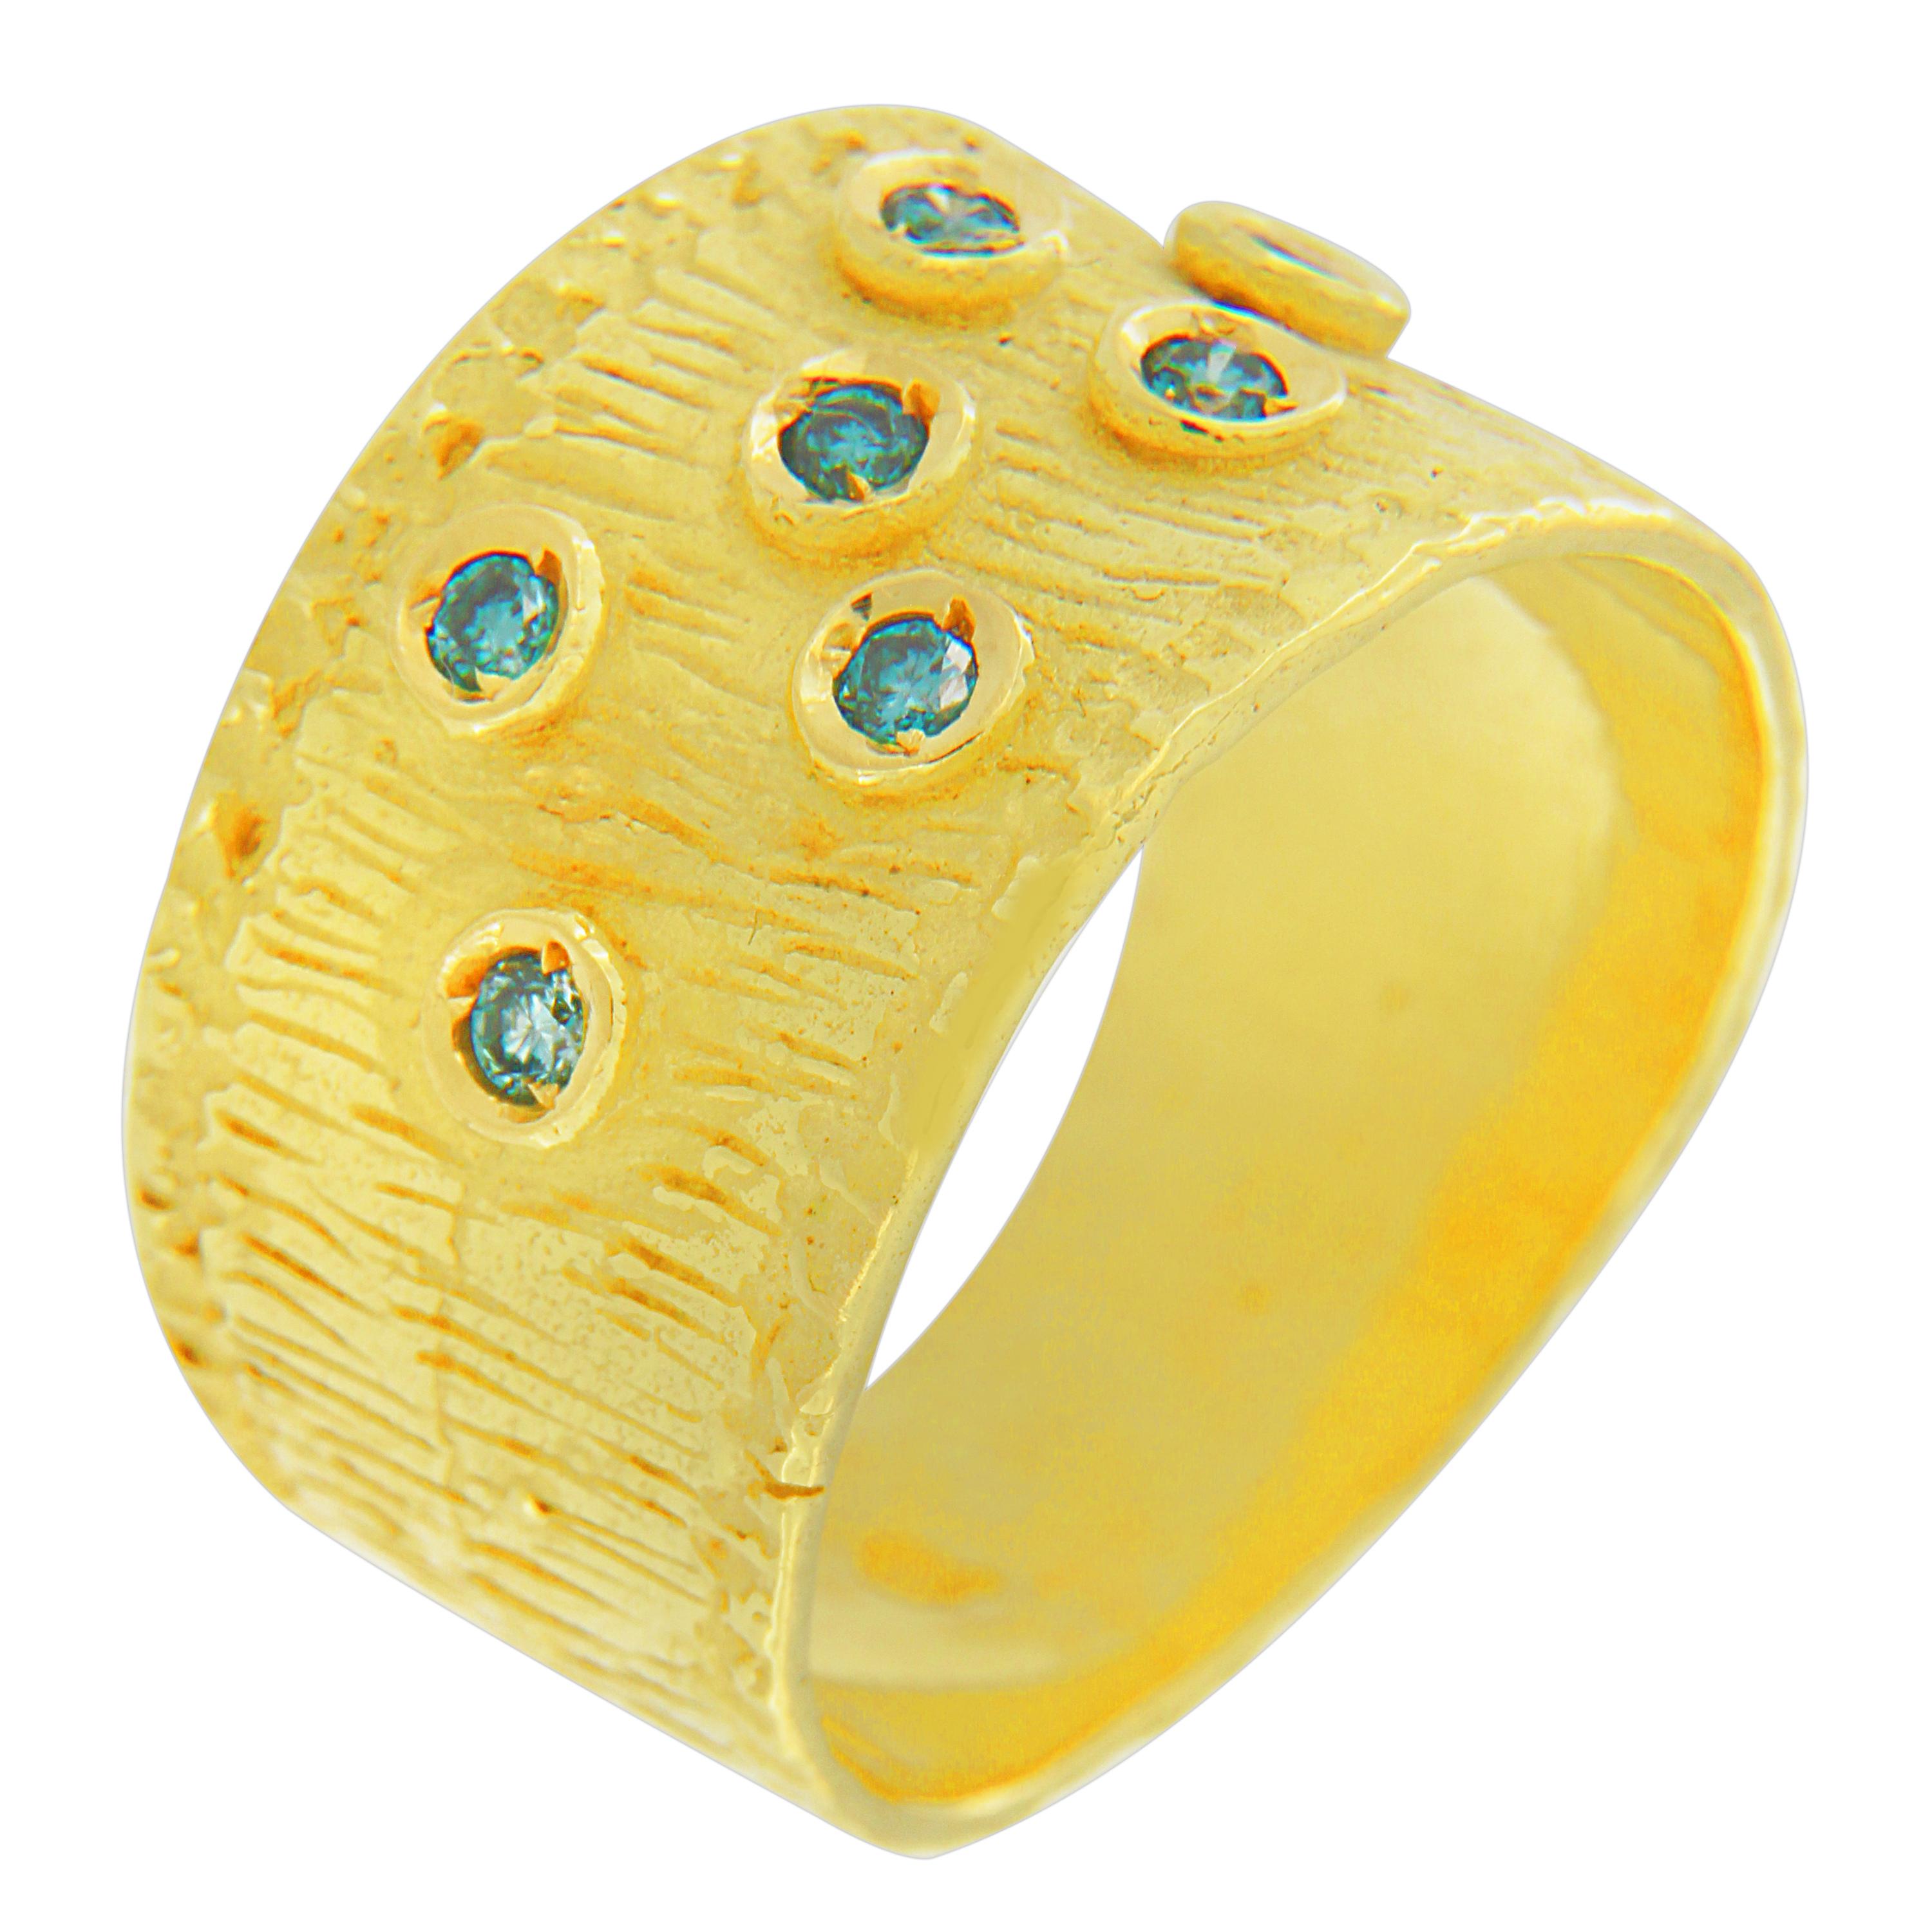 Lovely Satin Yellow Gold Wide Band Ring, hand-crafted with lost-wax casting technique.

Lost-wax casting, one of the oldest techniques for creating jewelry, forms the basis of Sacchi's jewelry production. Modelling wax in the round allows to sculpt